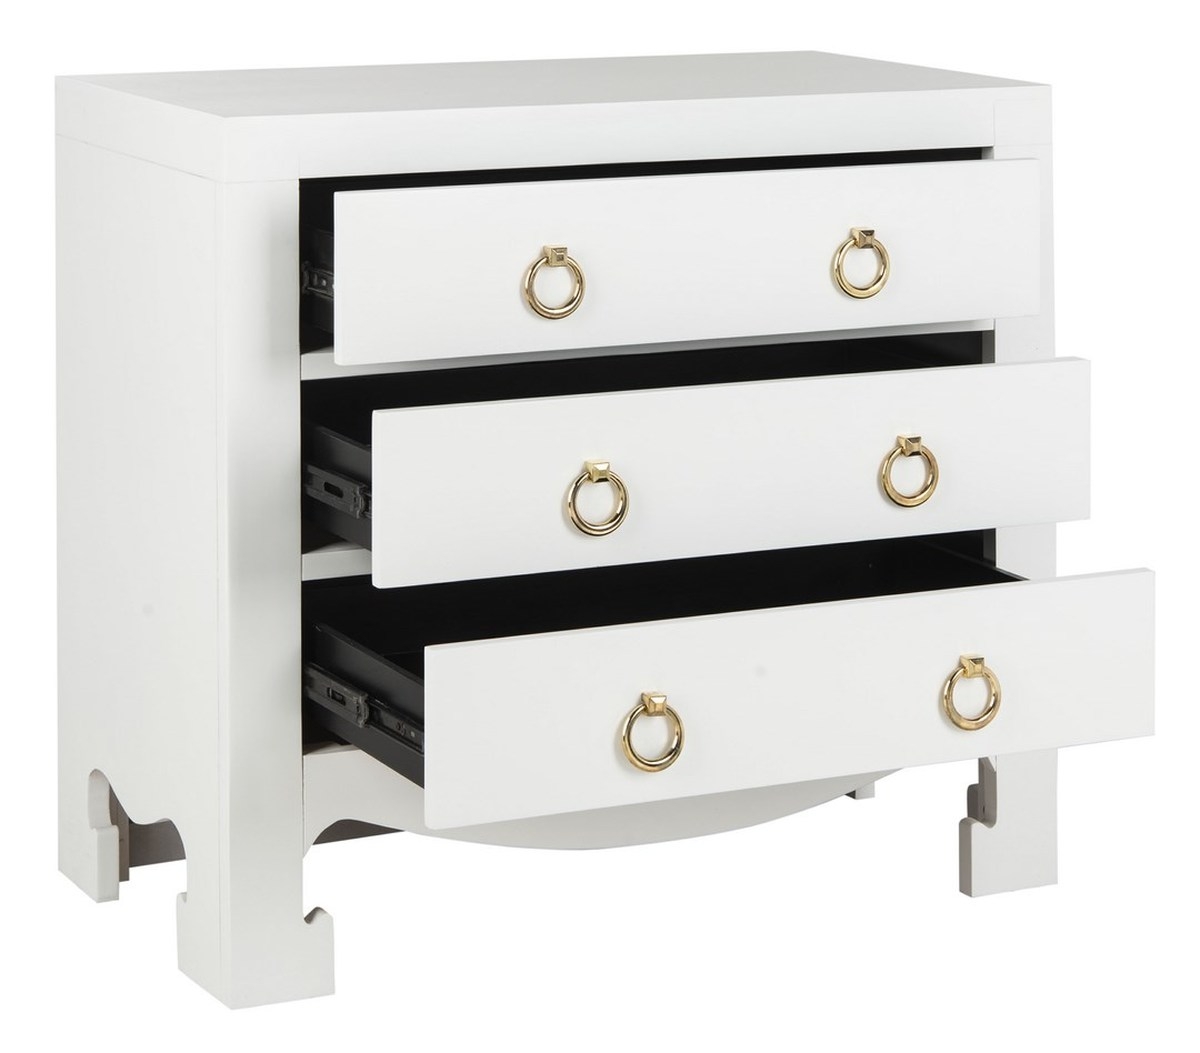 Dion 3 Drawer Chest - White/Gold - Arlo Home - Image 1